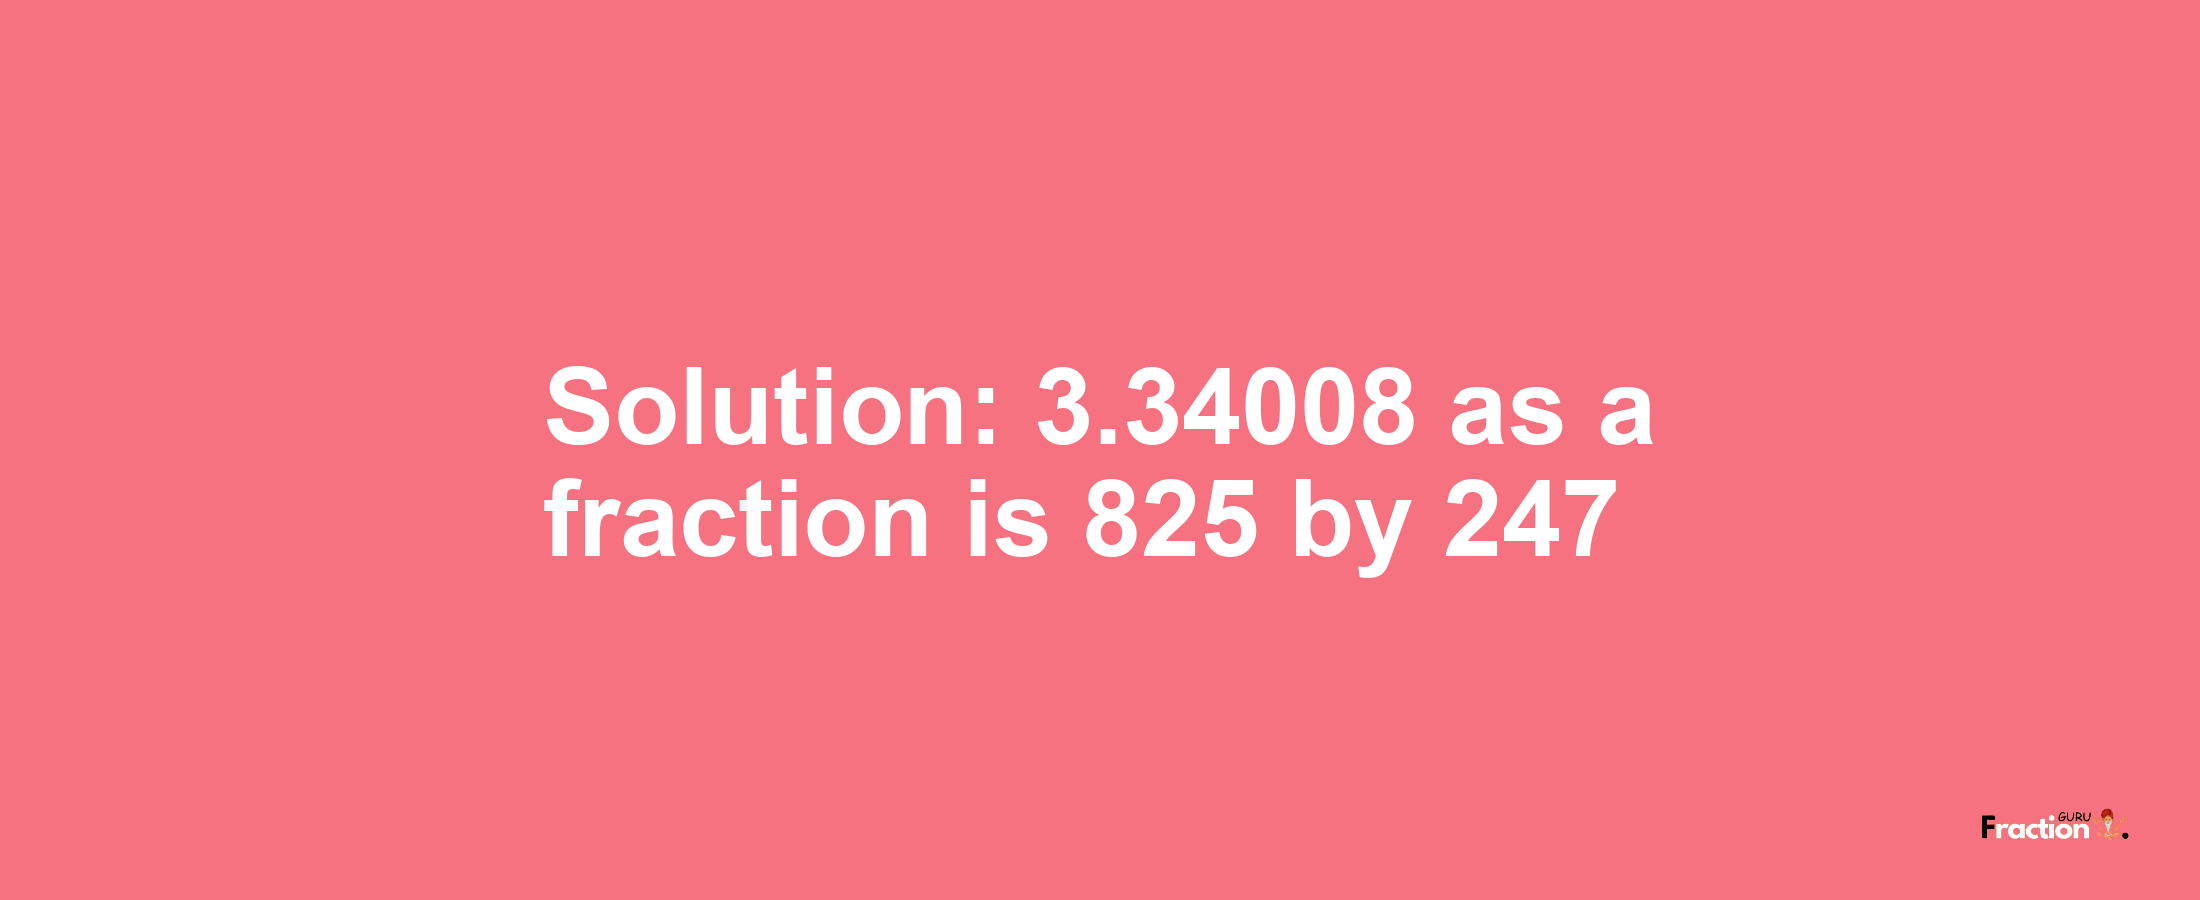 Solution:3.34008 as a fraction is 825/247